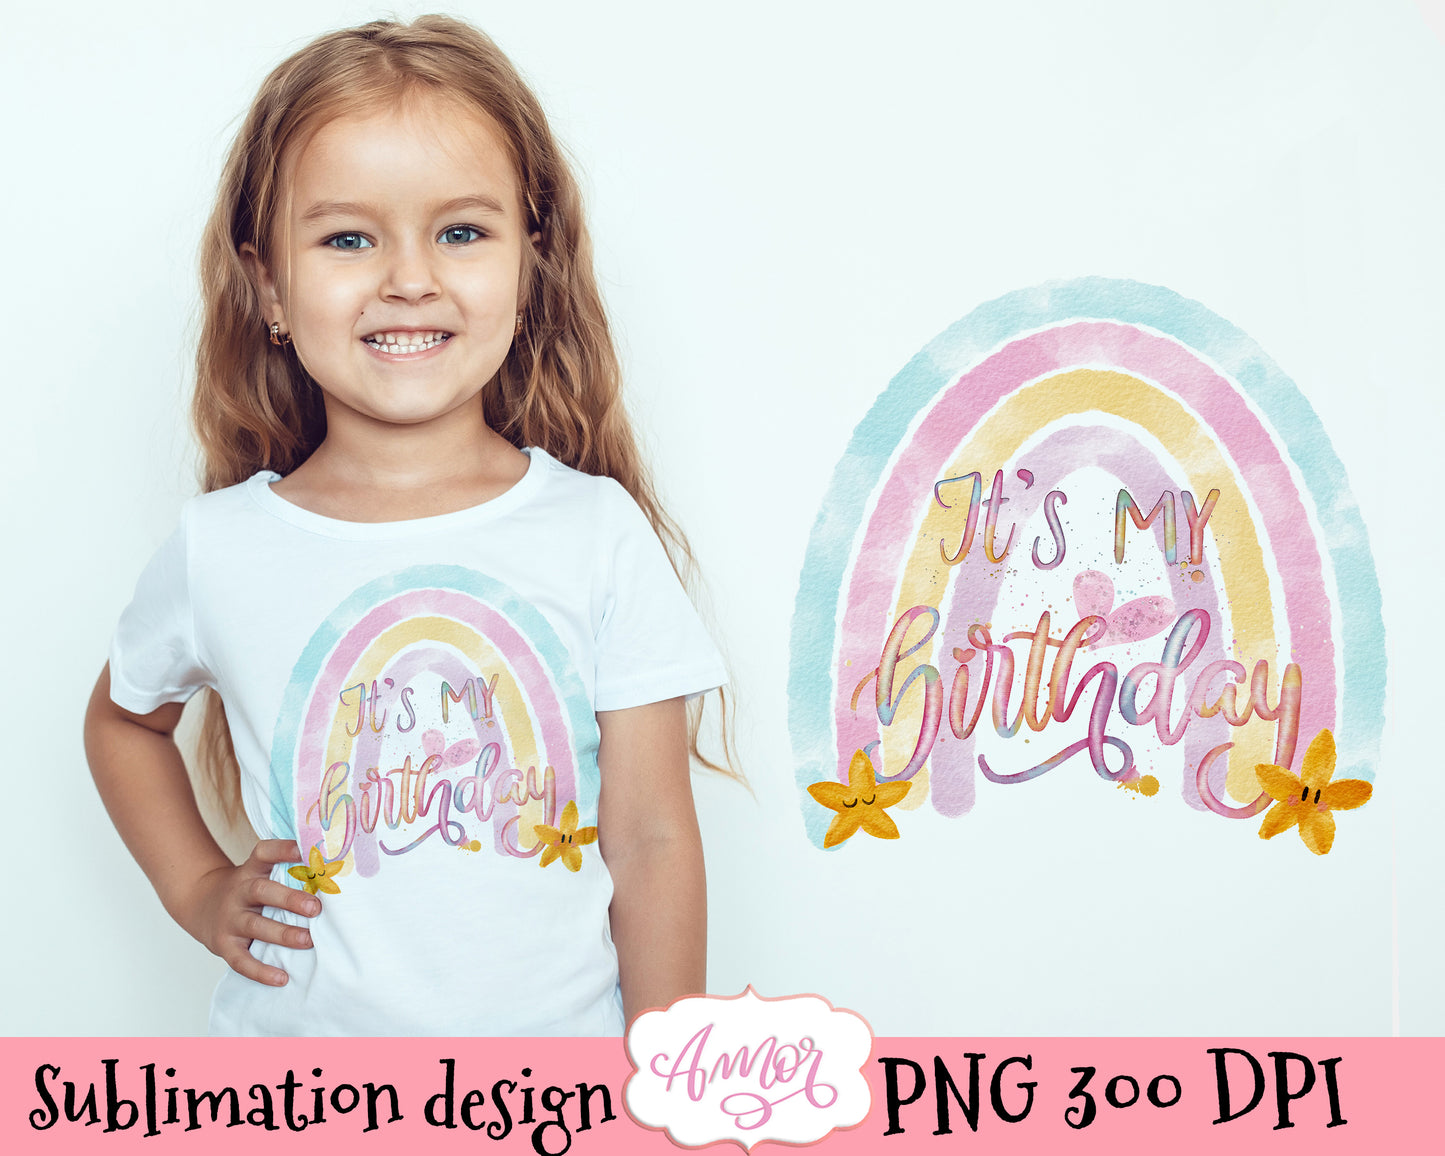 "It´s my birthday" sublimation design for T-shirts with a cute rainbow